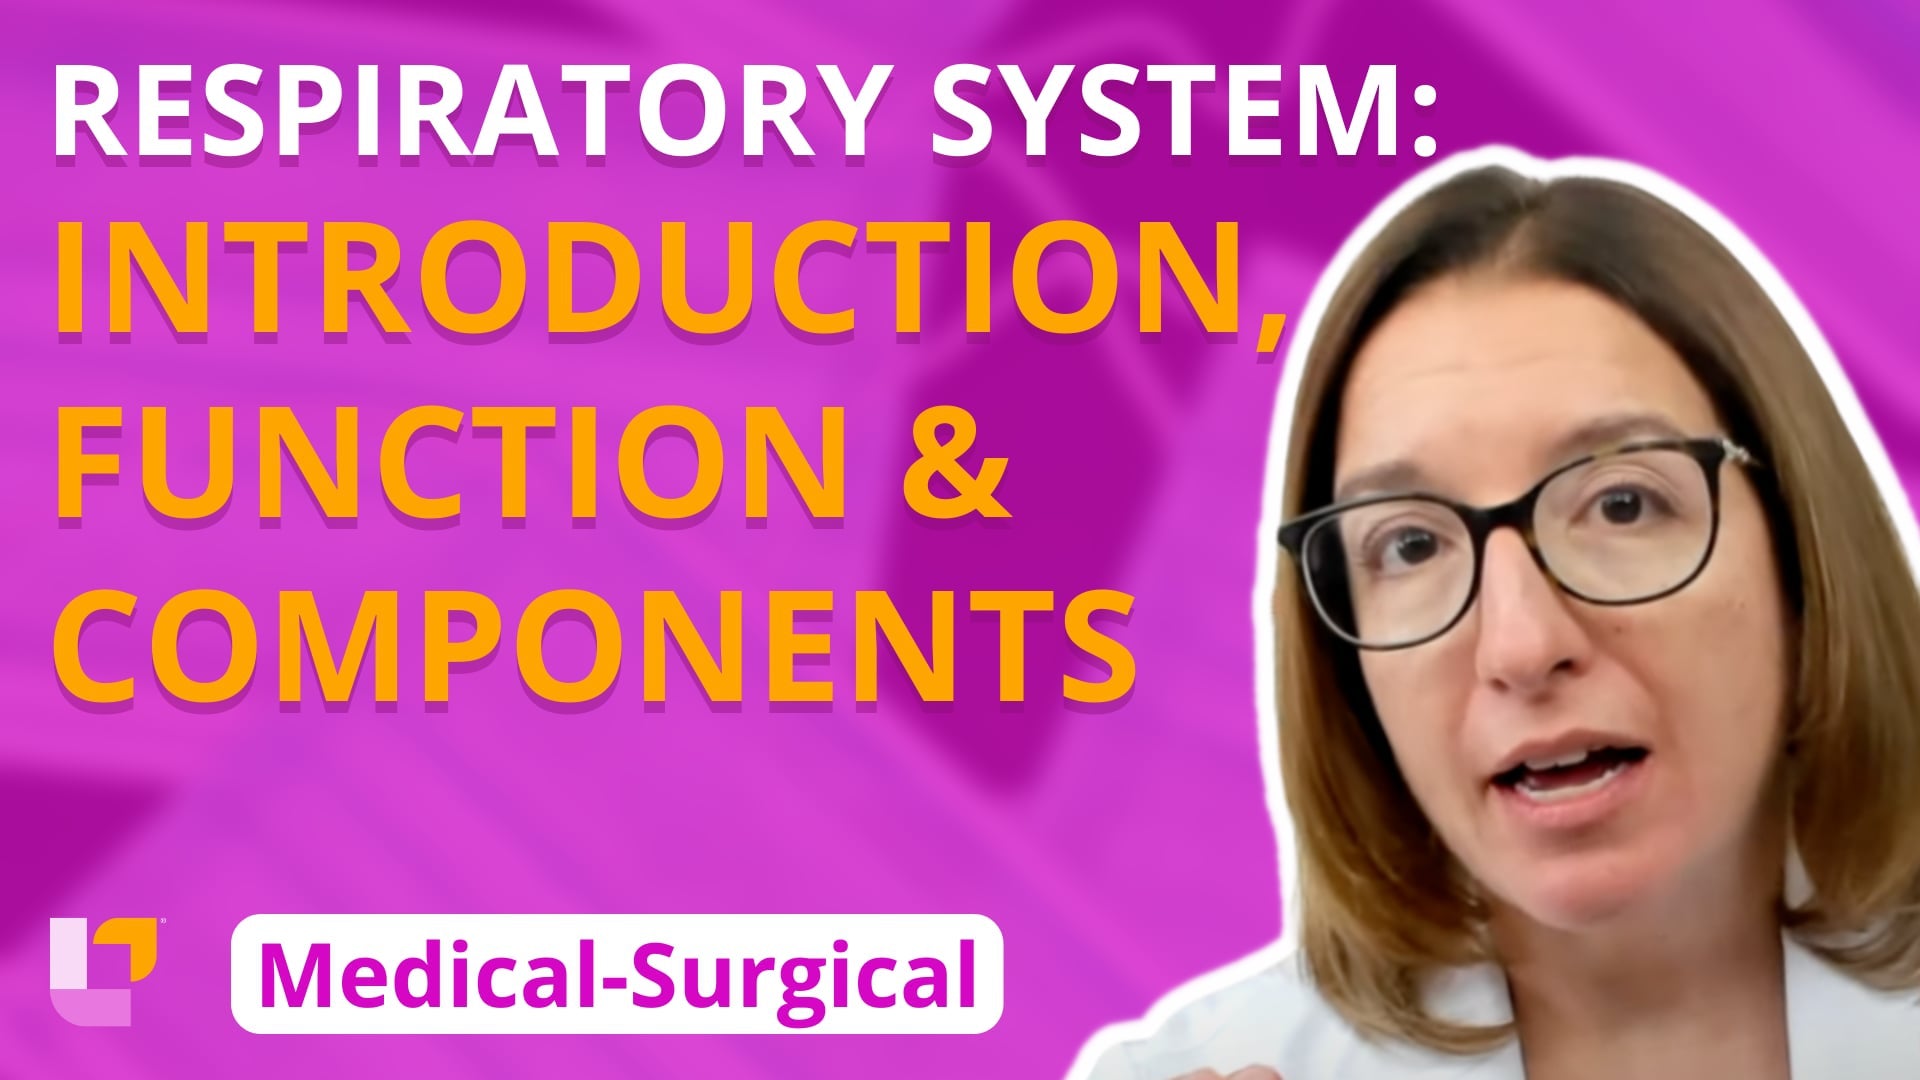 Med-Surg Respiratory System, part 1: Introduction, Function, Components - LevelUpRN